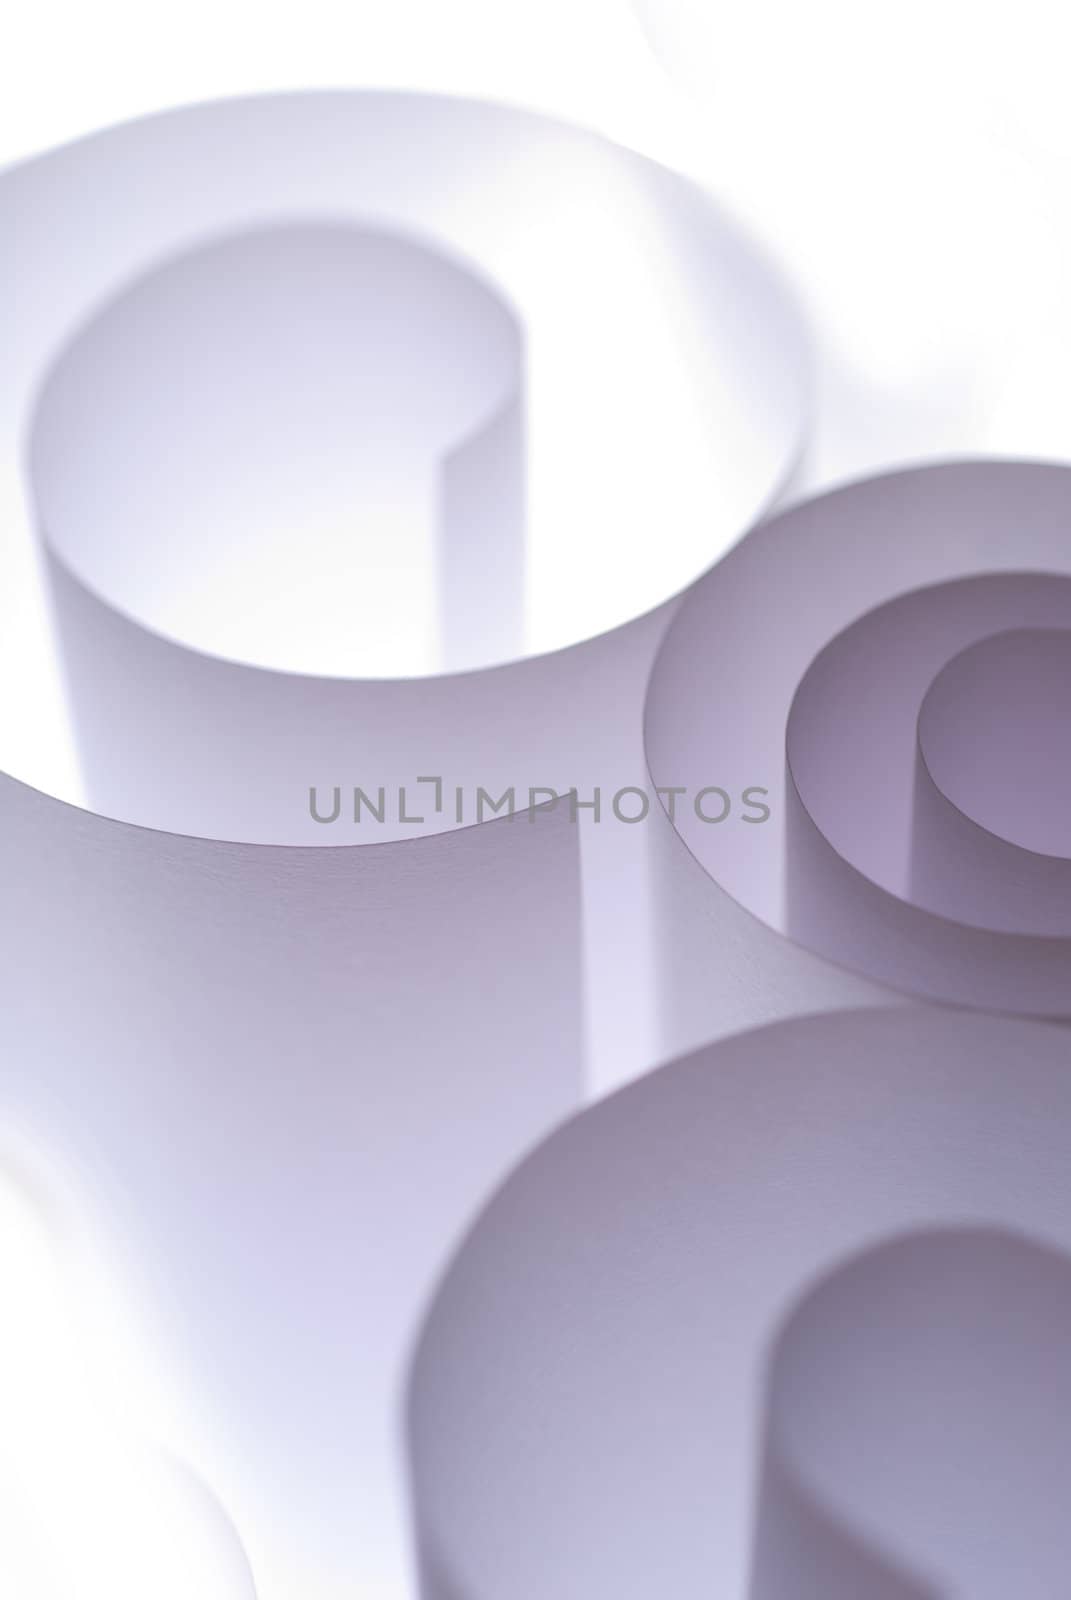 Paper curls in A4 size overexposed in studio